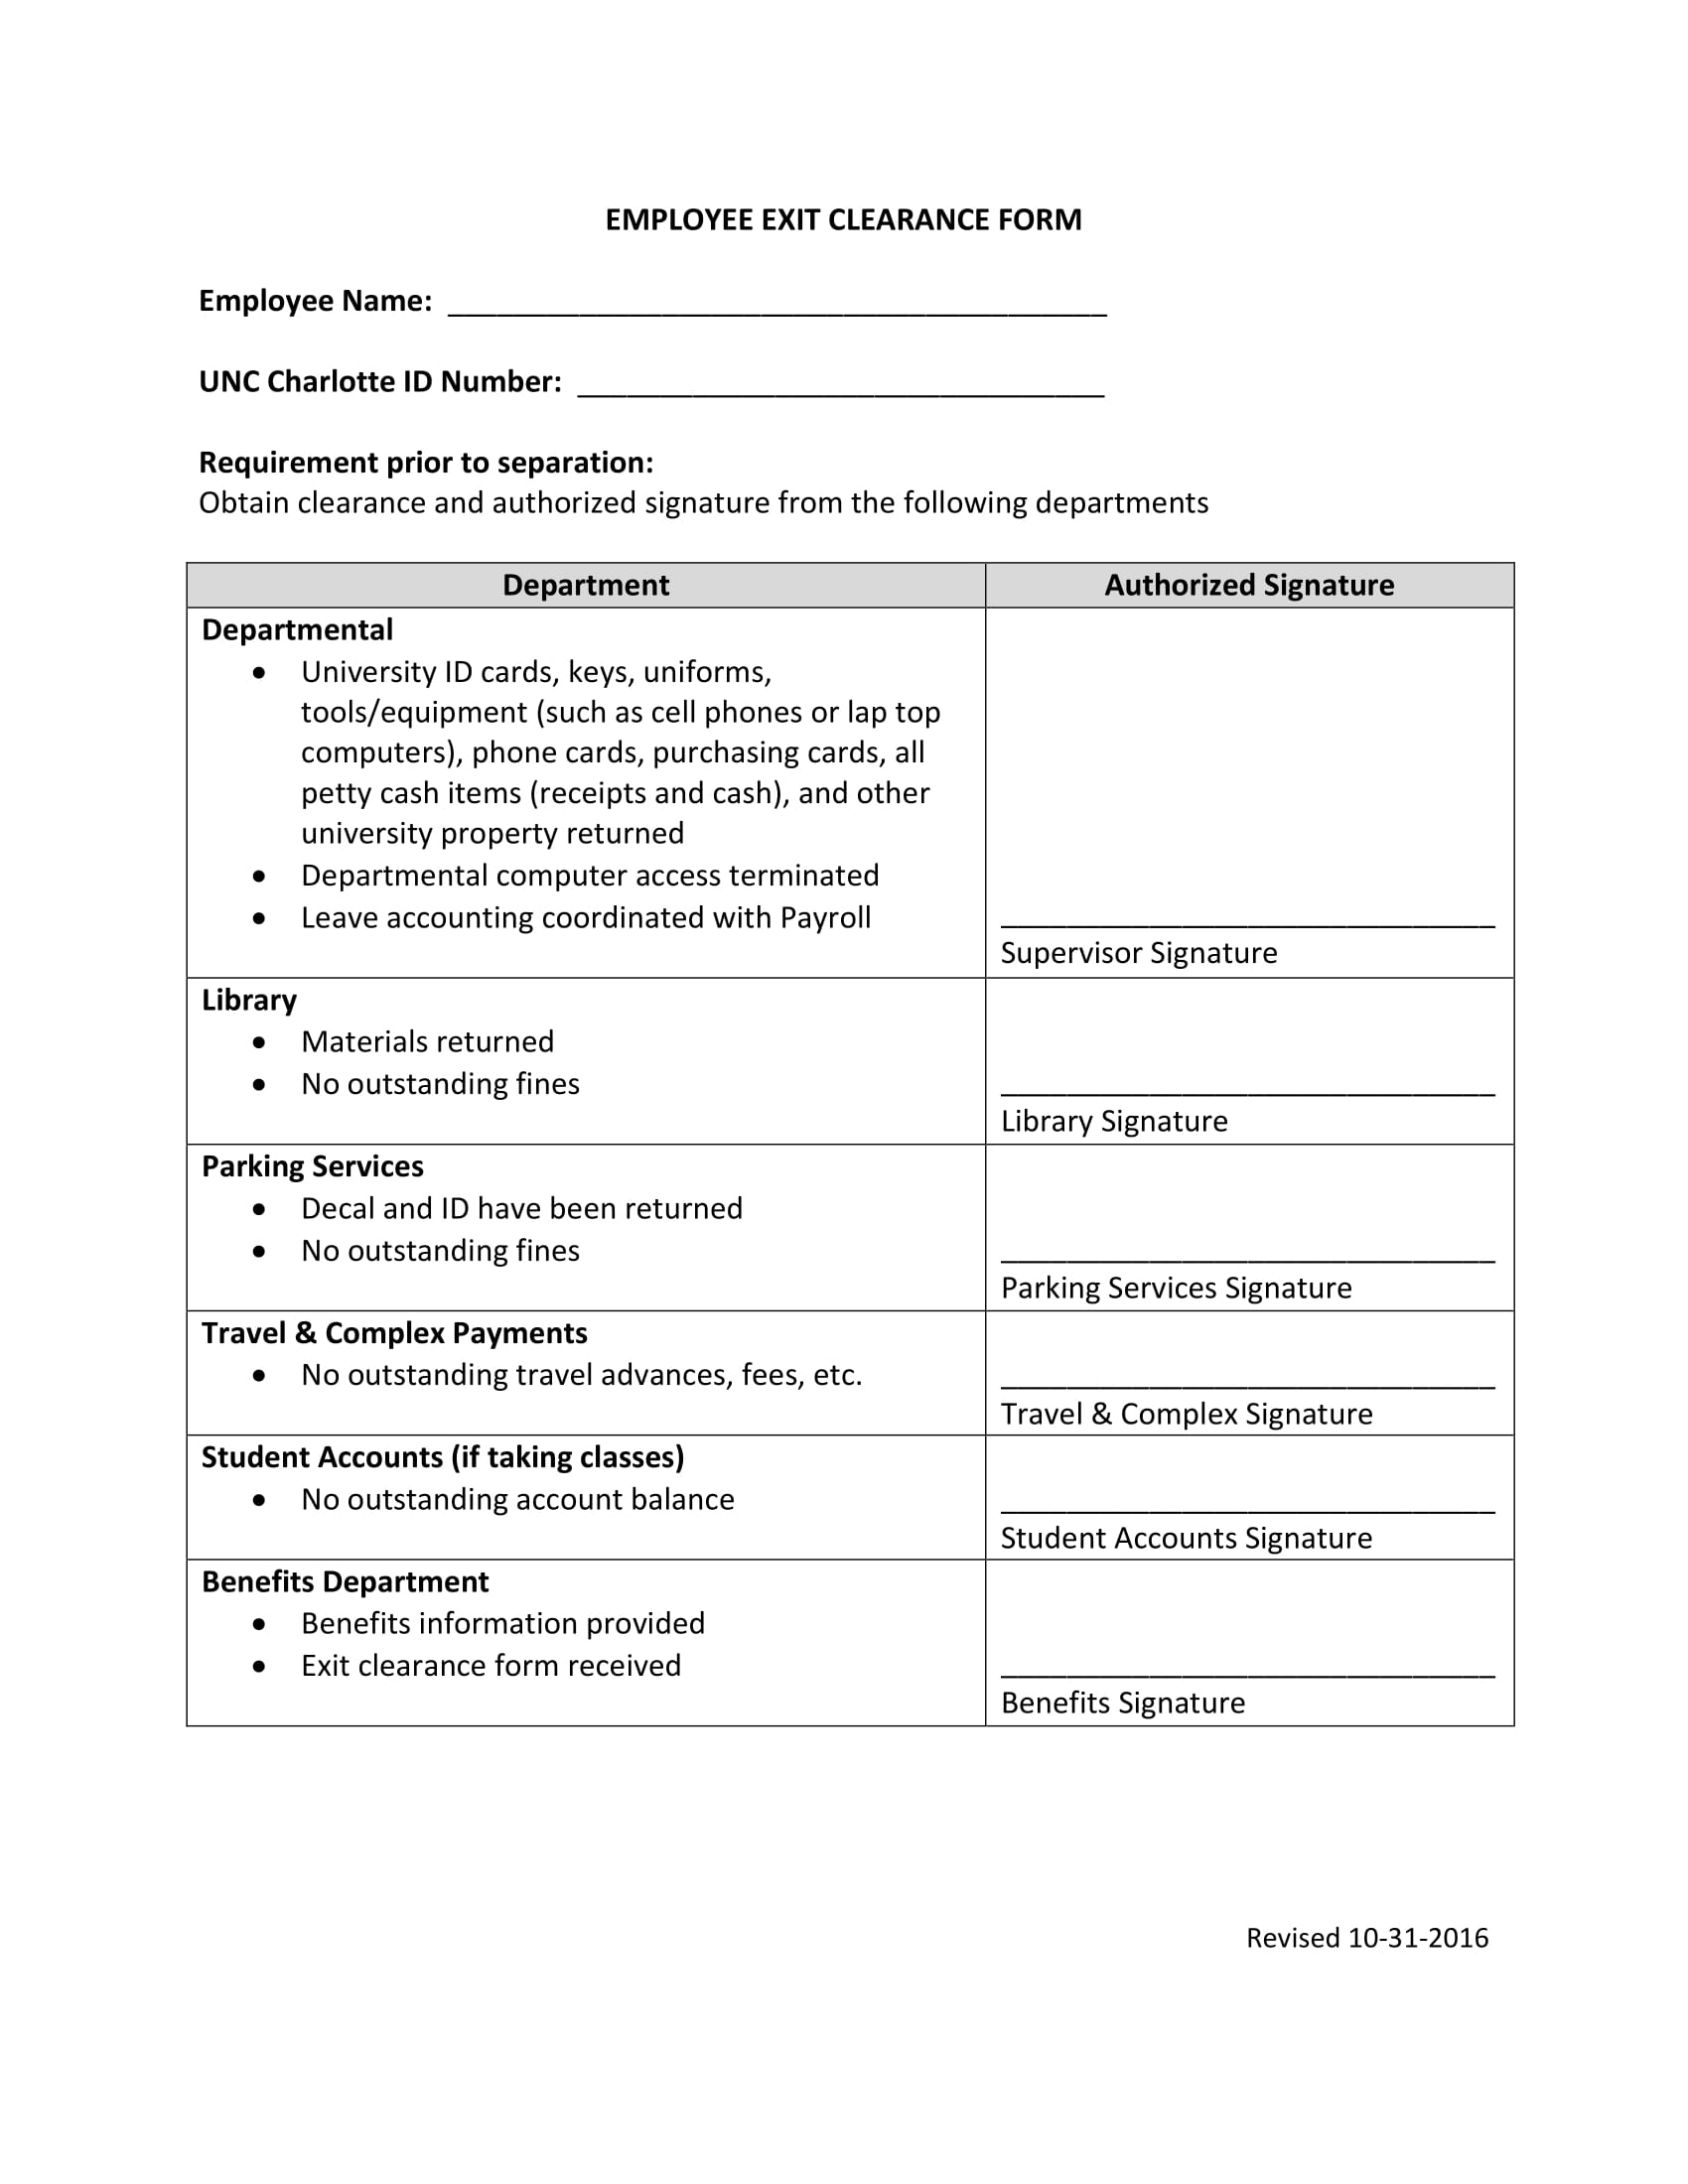 employee exit clearance form 1